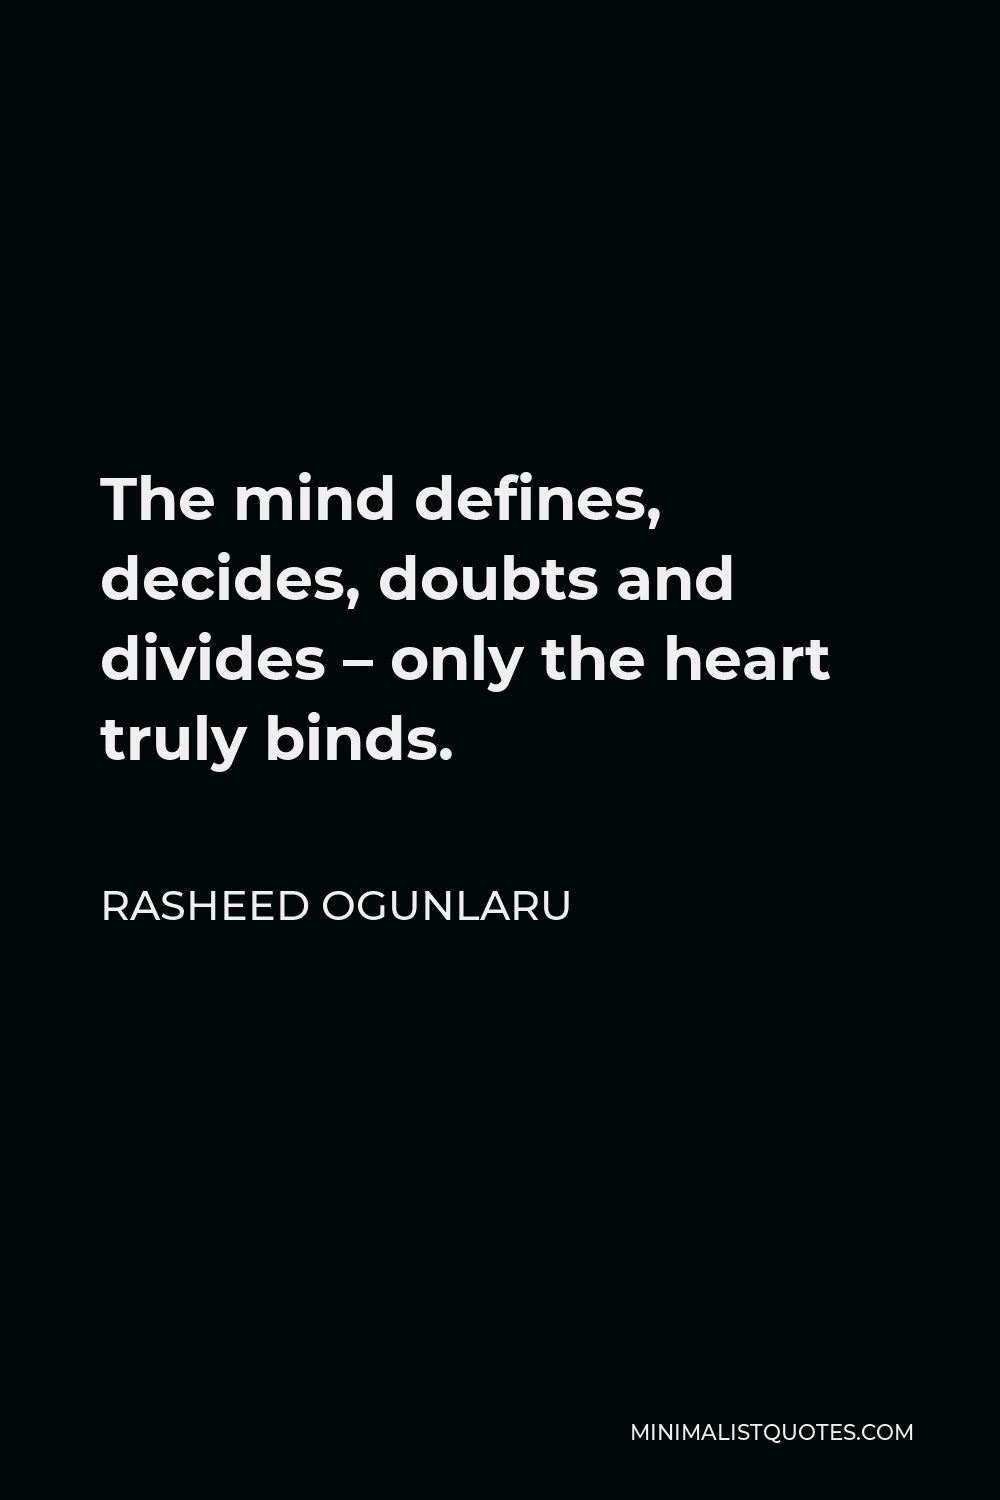 Rasheed Ogunlaru Quote - The mind defines, decides, doubts and divides – only the heart truly binds.